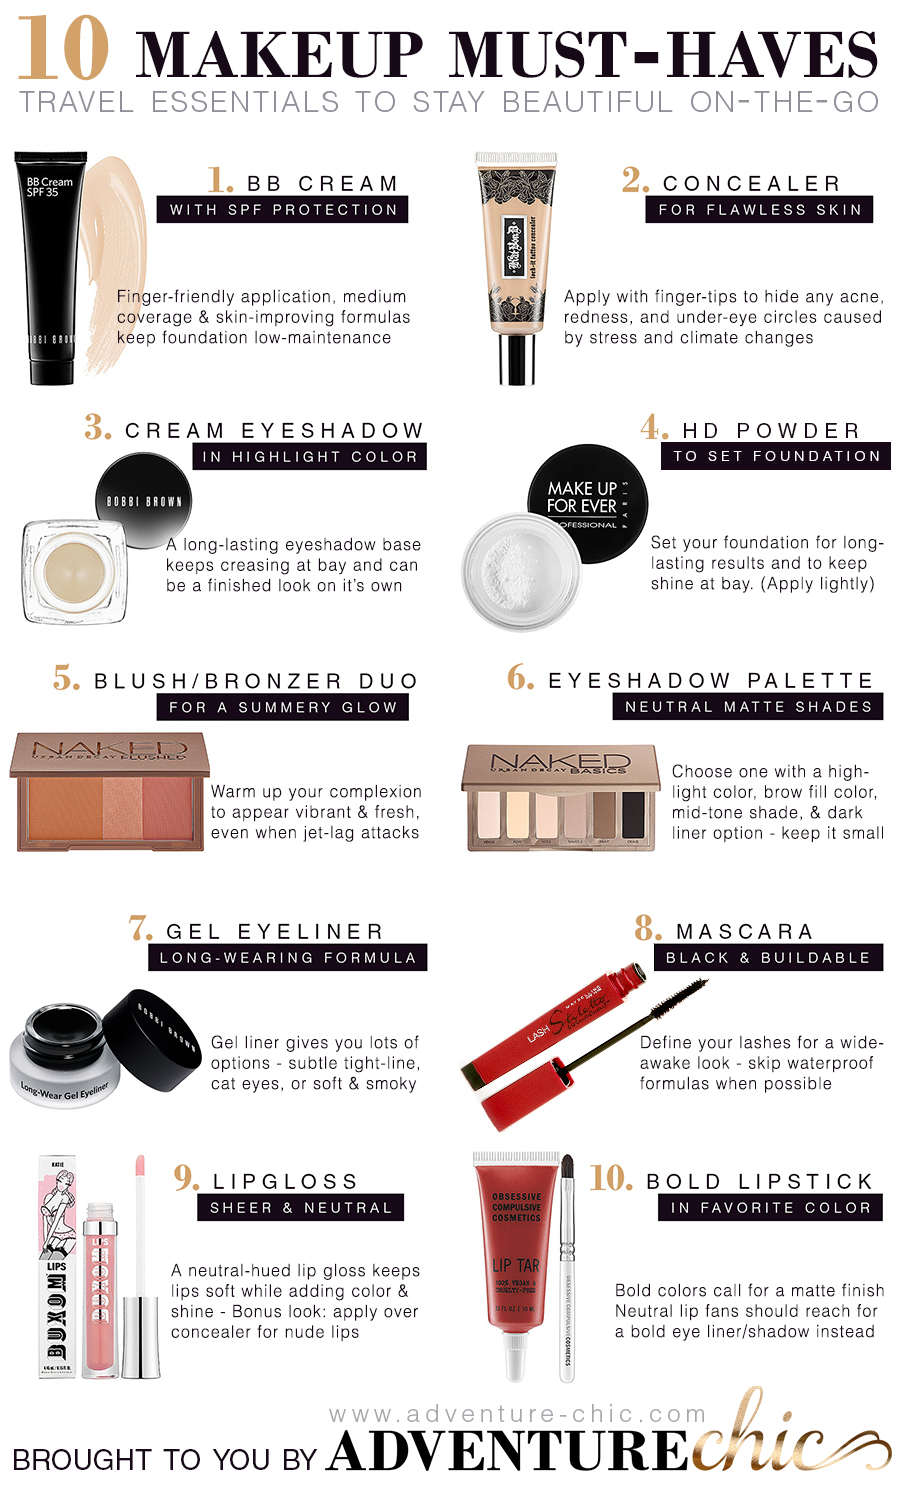 10 Makeup Must-Haves for Travel